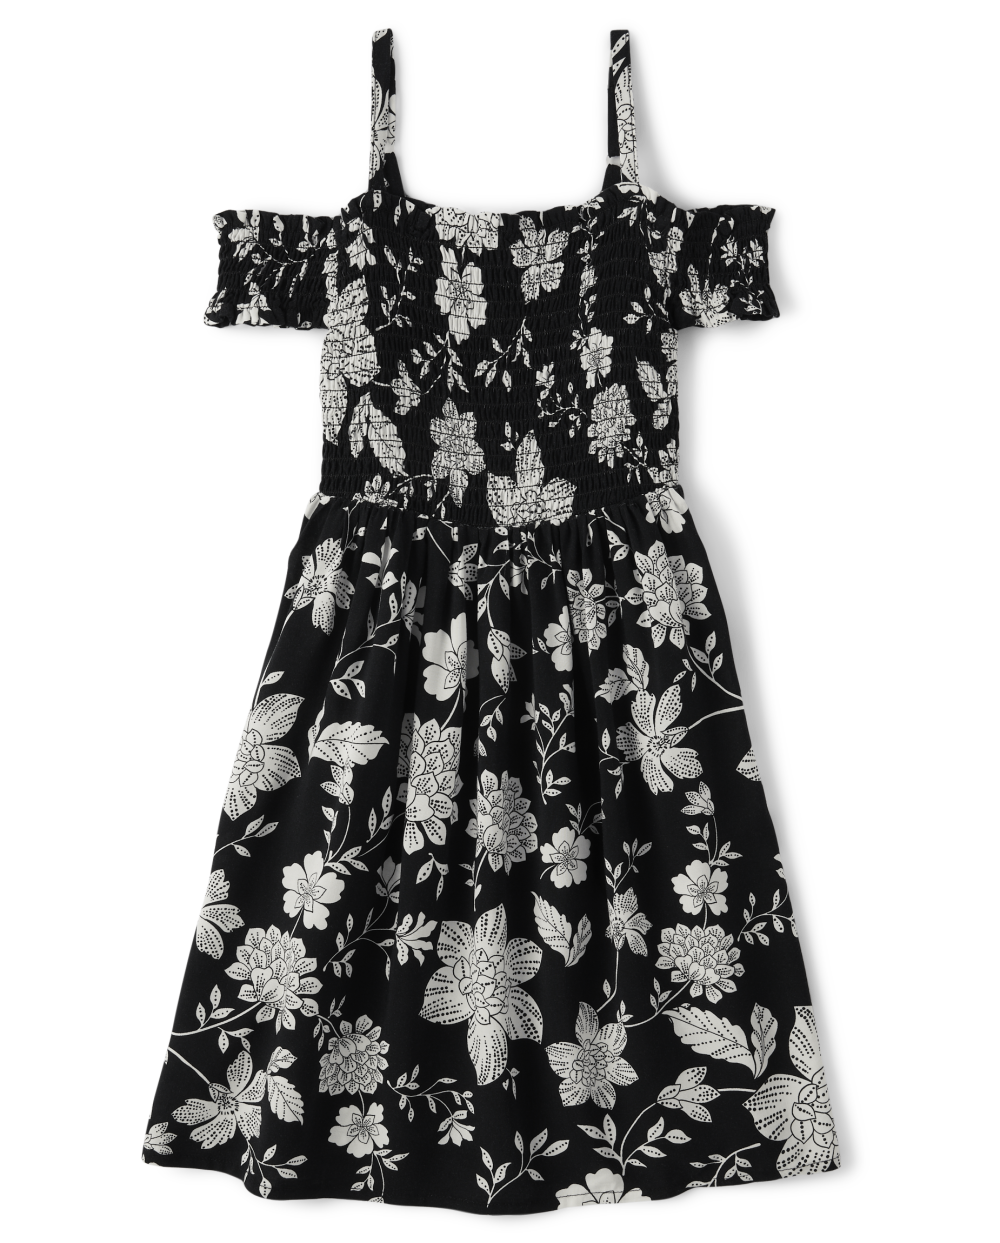 Girls Floral Print Rayon Cold Shoulder Short Sleeves Sleeves Off the Shoulder Smocked Ruffle Trim Above the Knee Dress